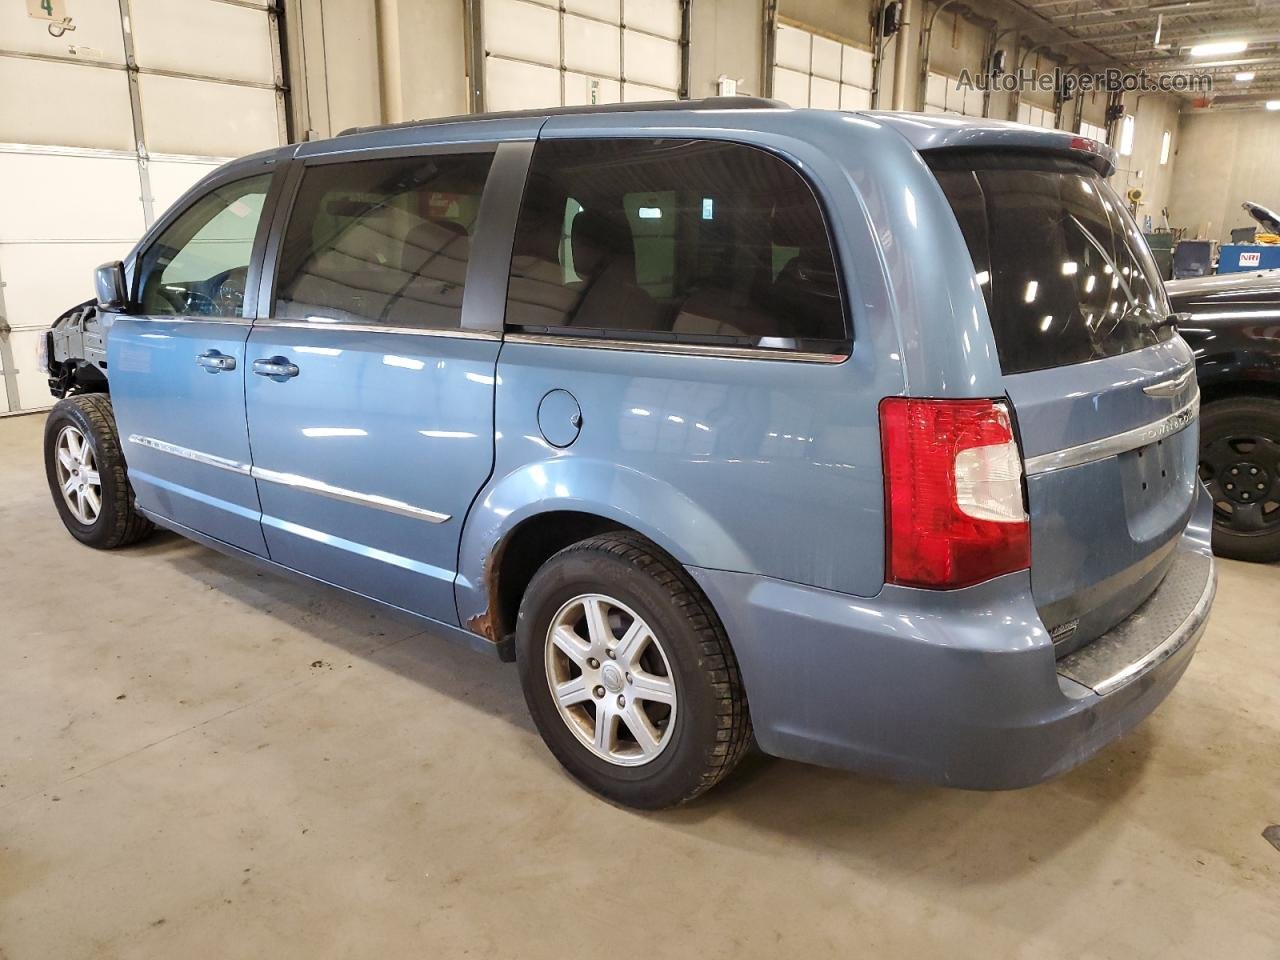 2011 Chrysler Town & Country Touring Blue vin: 2A4RR5DG2BR696252